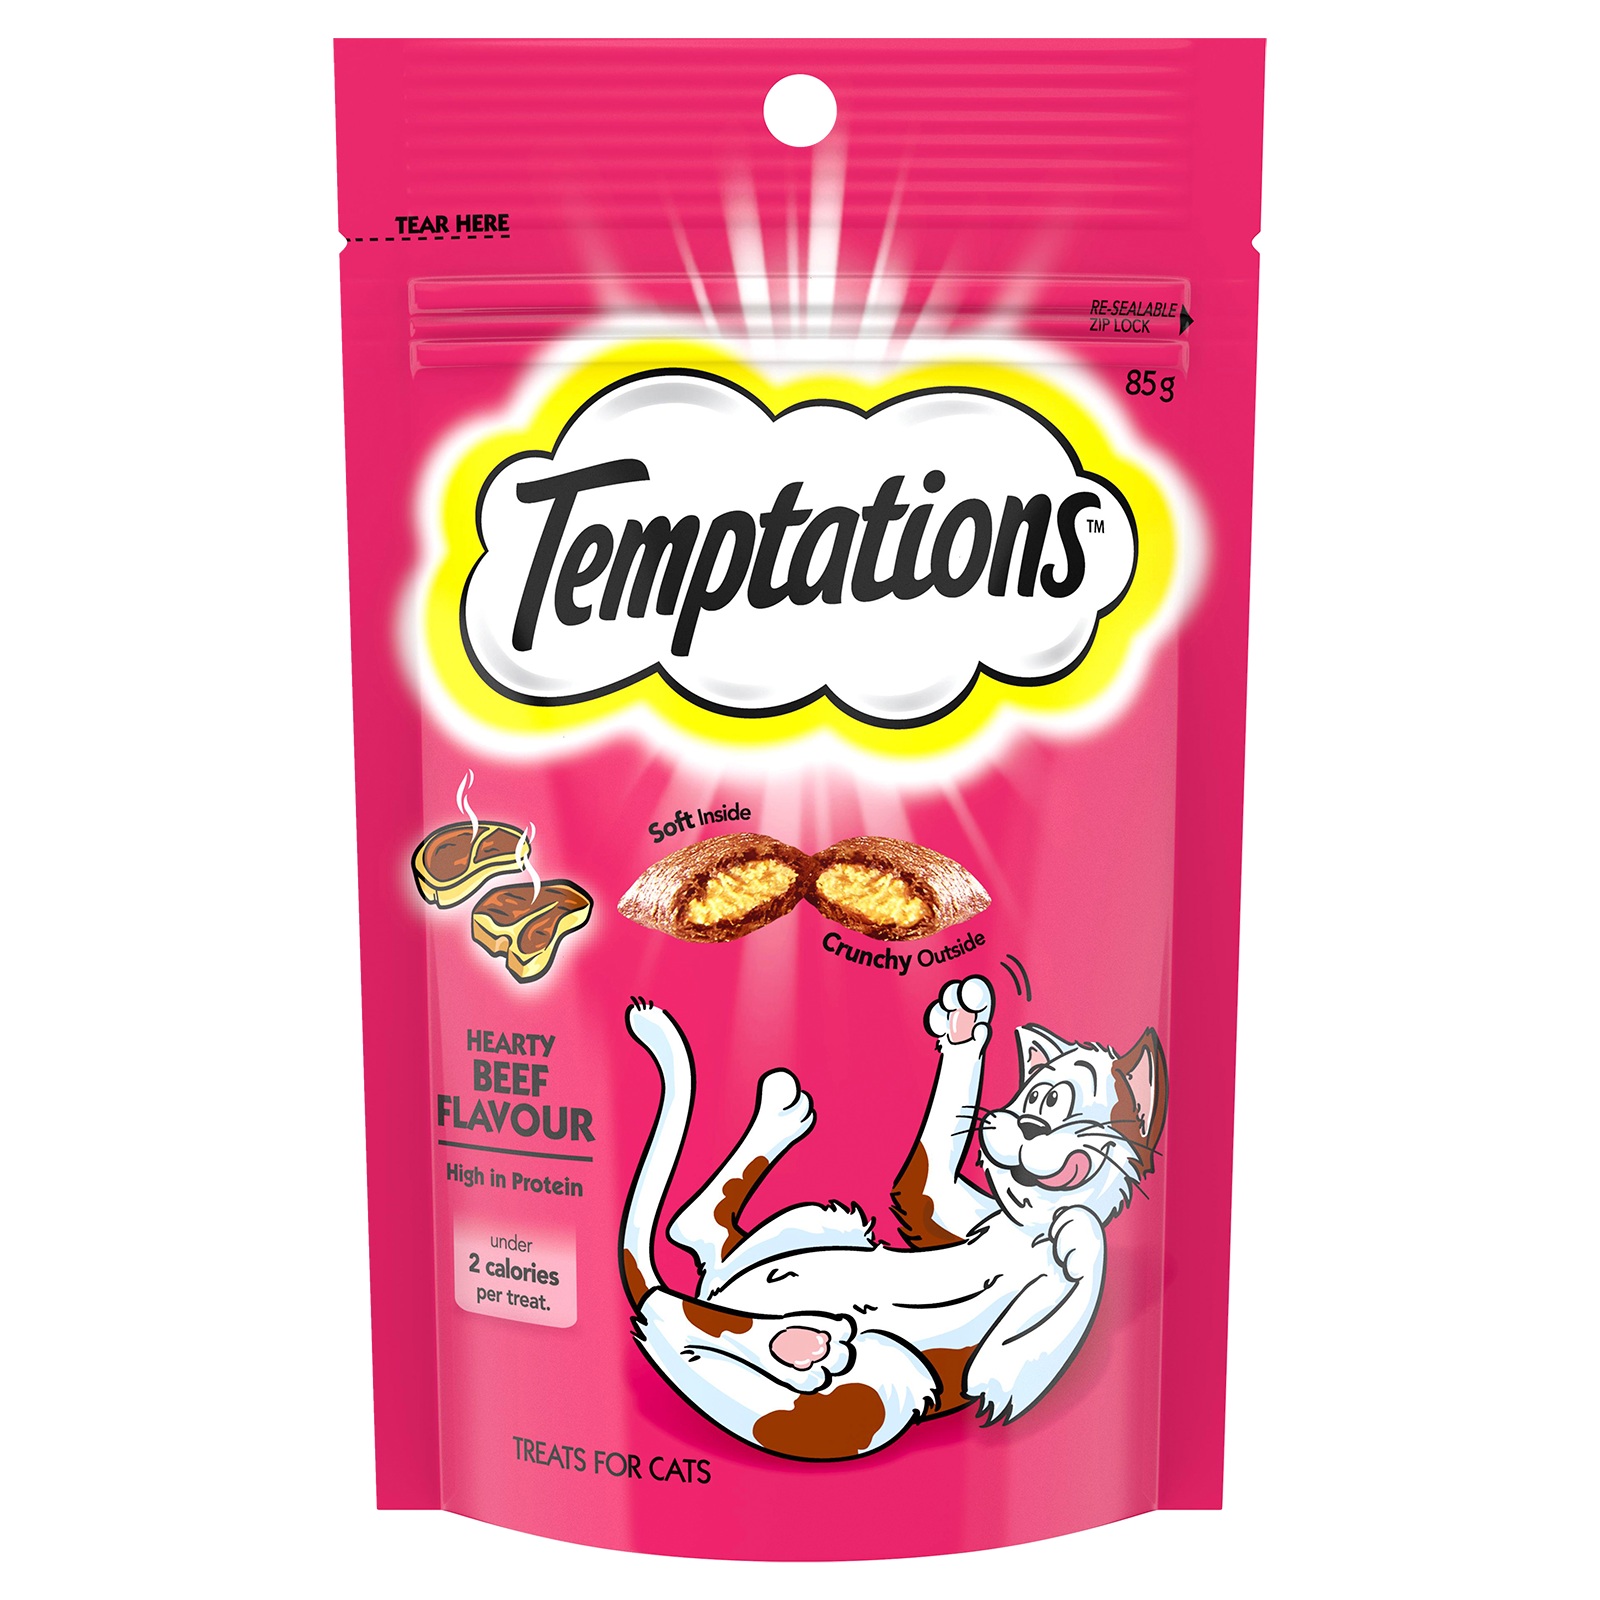 Temptations Hearty Beef Flavour Cat Treats